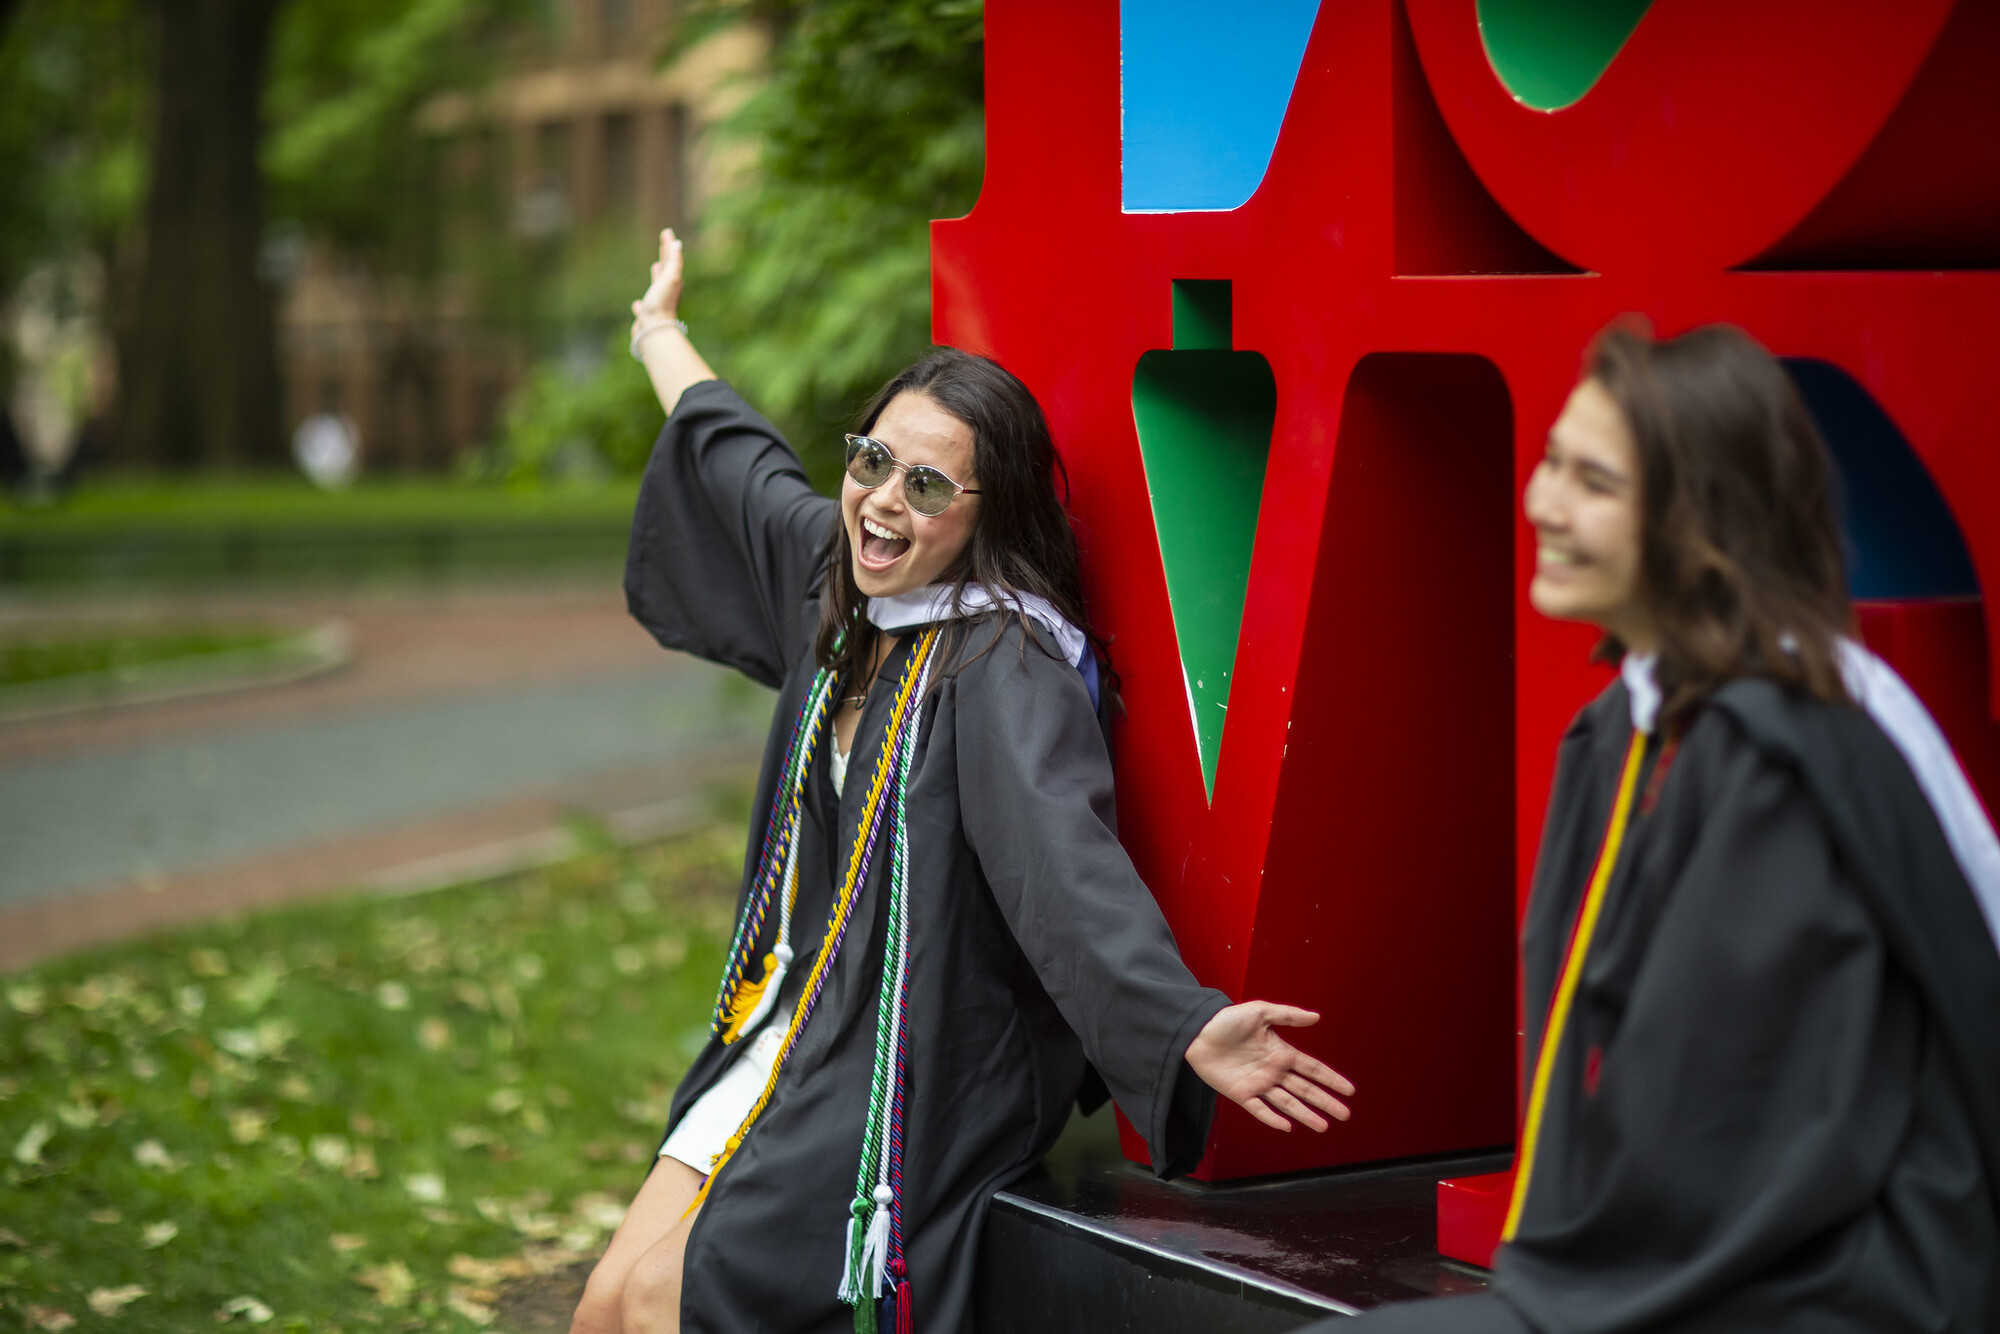 two students celebrating after Penn’s commencement at Robert Indiana’s LOVE statue.